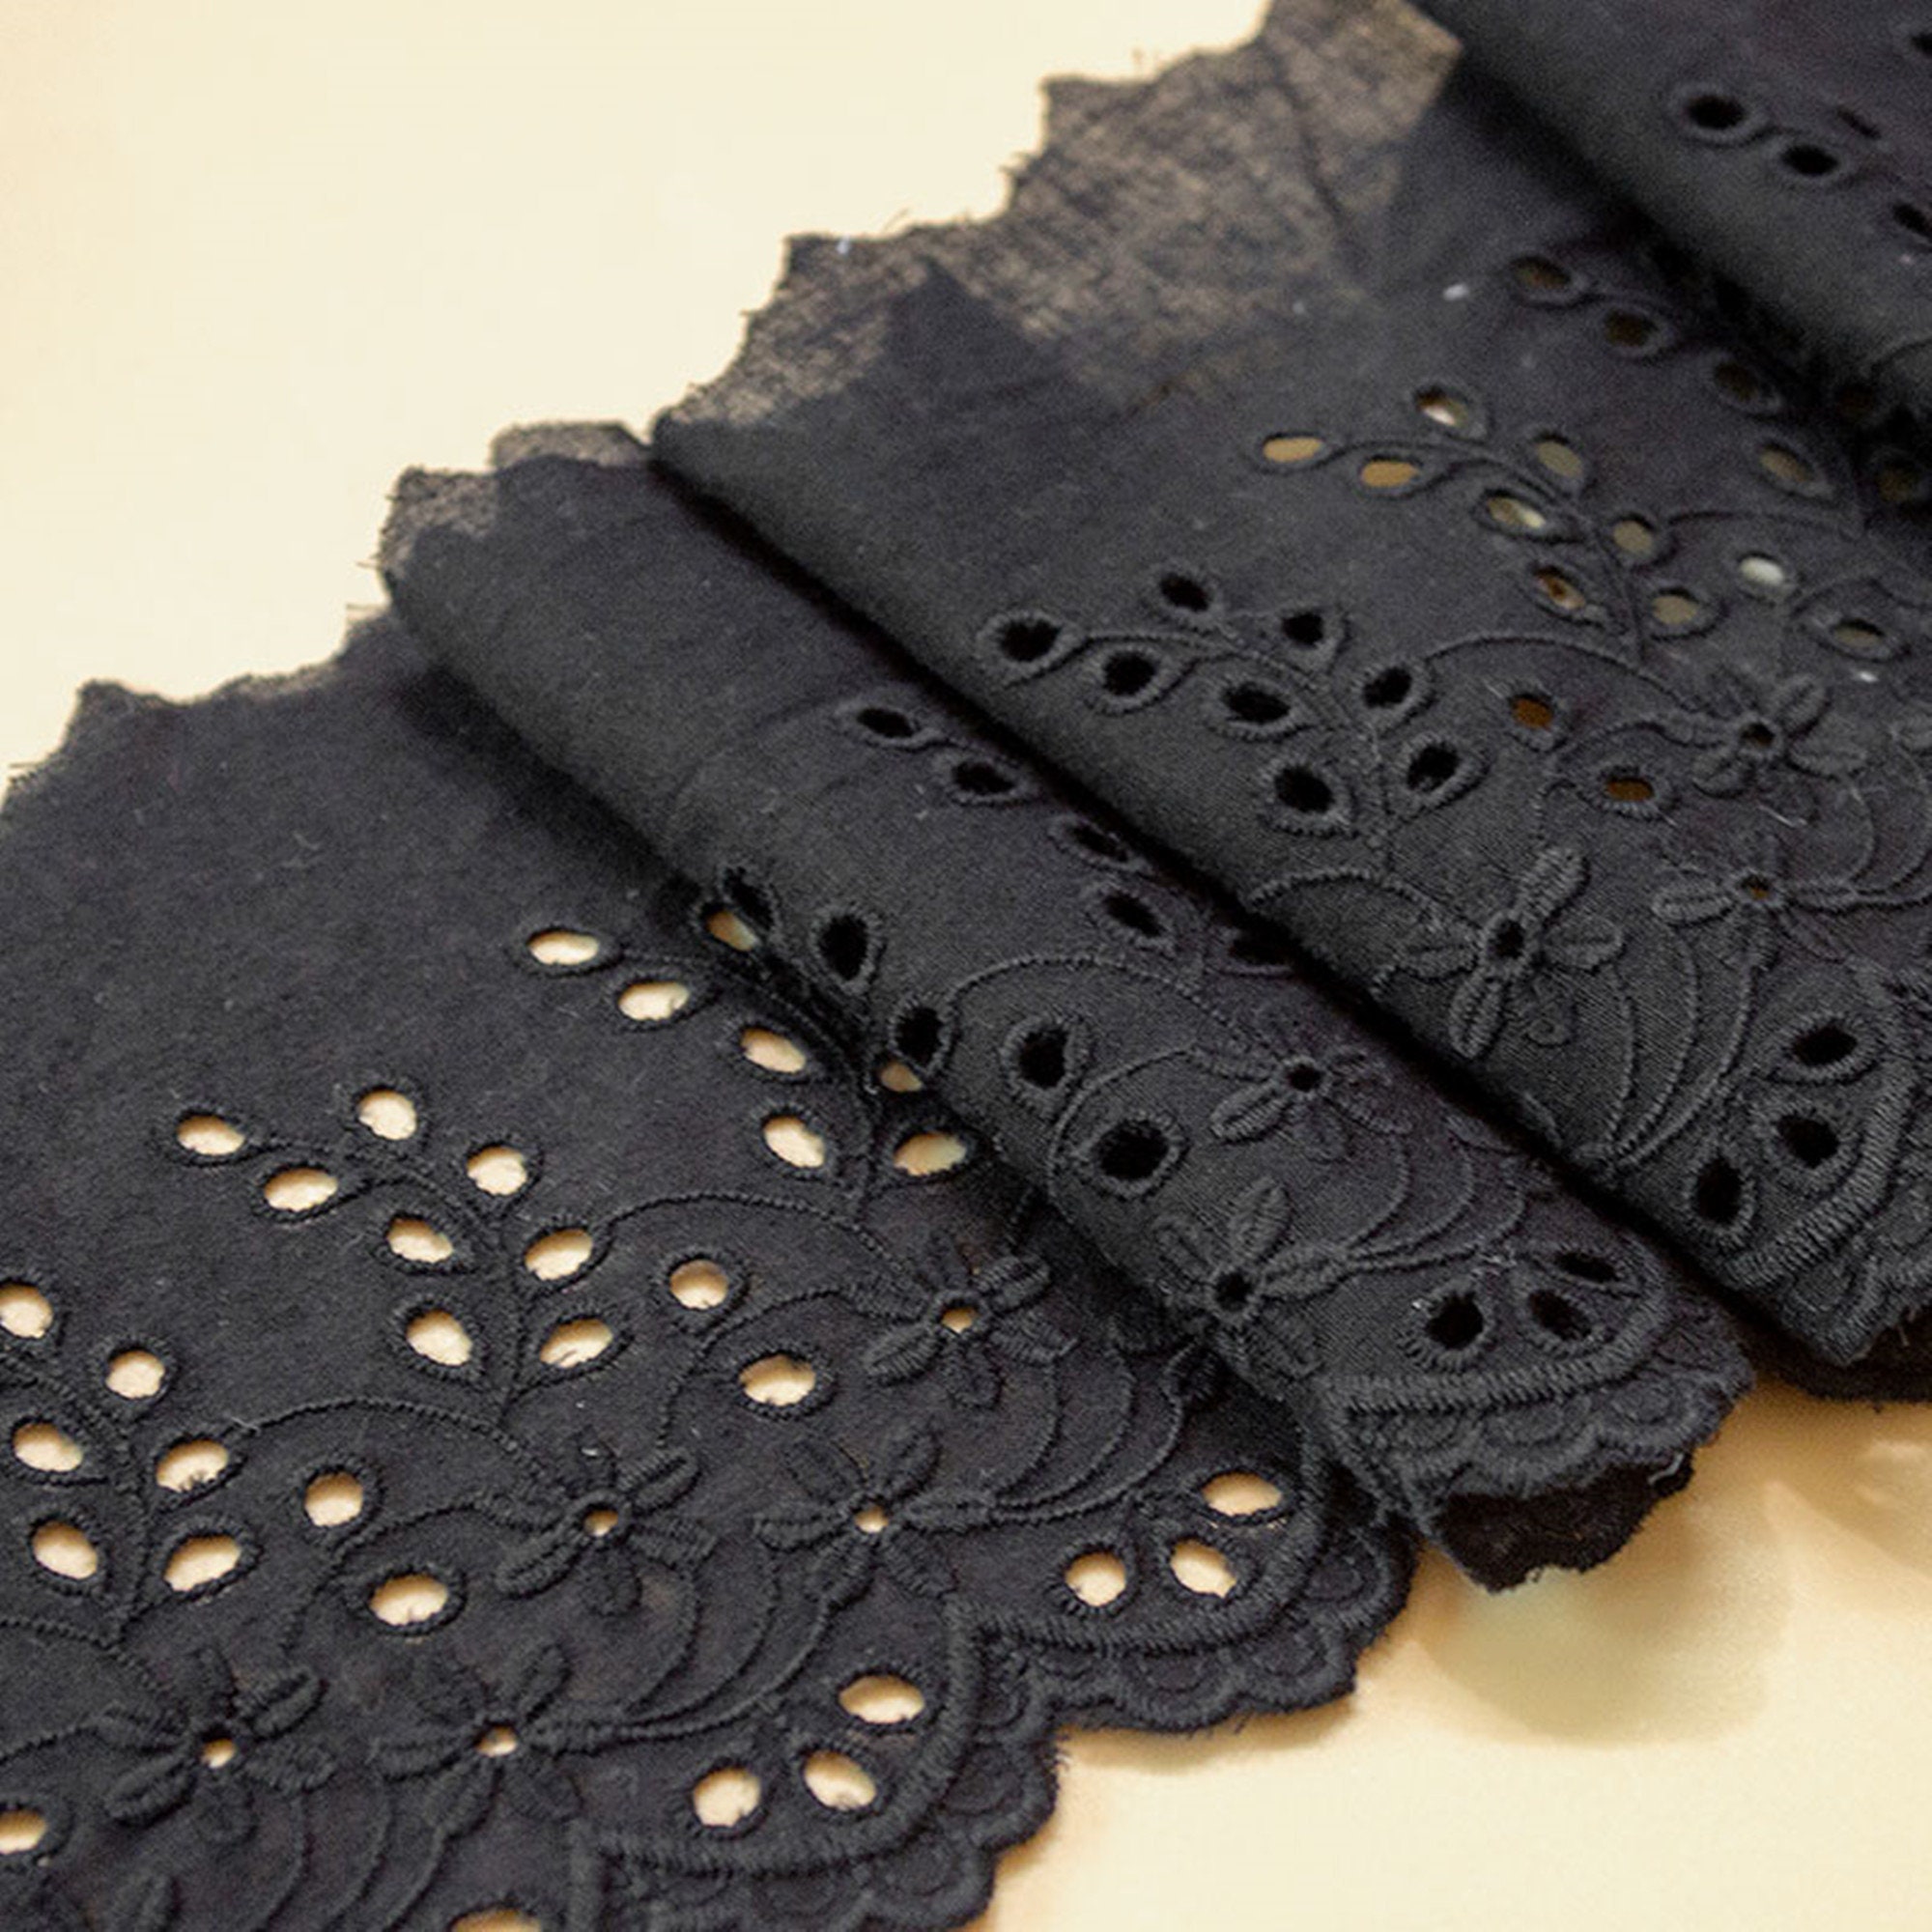 Black Lace Ribbon - 9 x 10 Yards [LS156-89] - $28.50 : Your Fabric